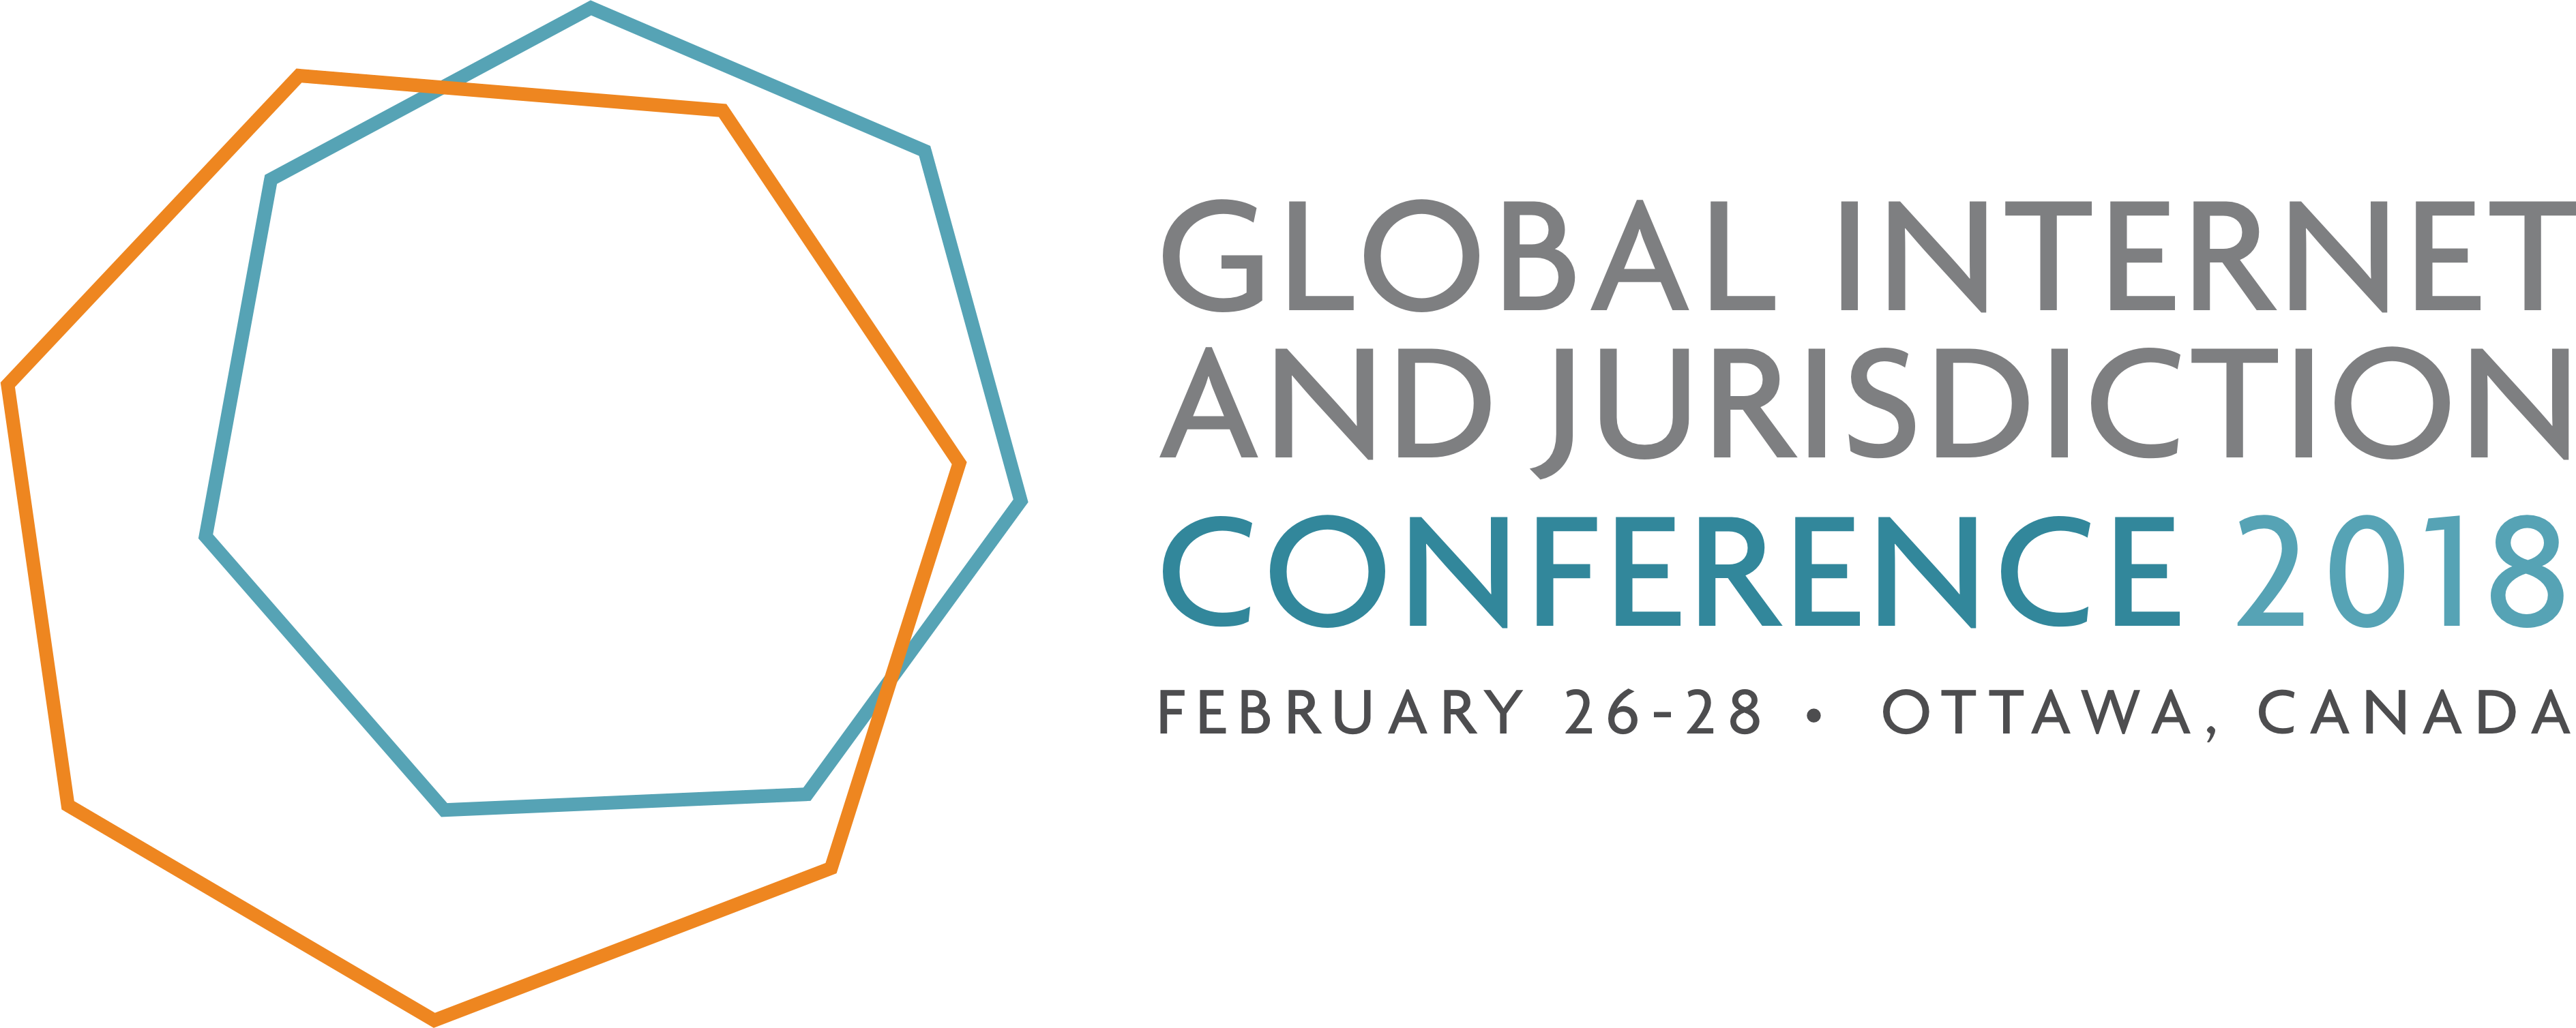 2018 Global Internet and Jurisdiction Conference